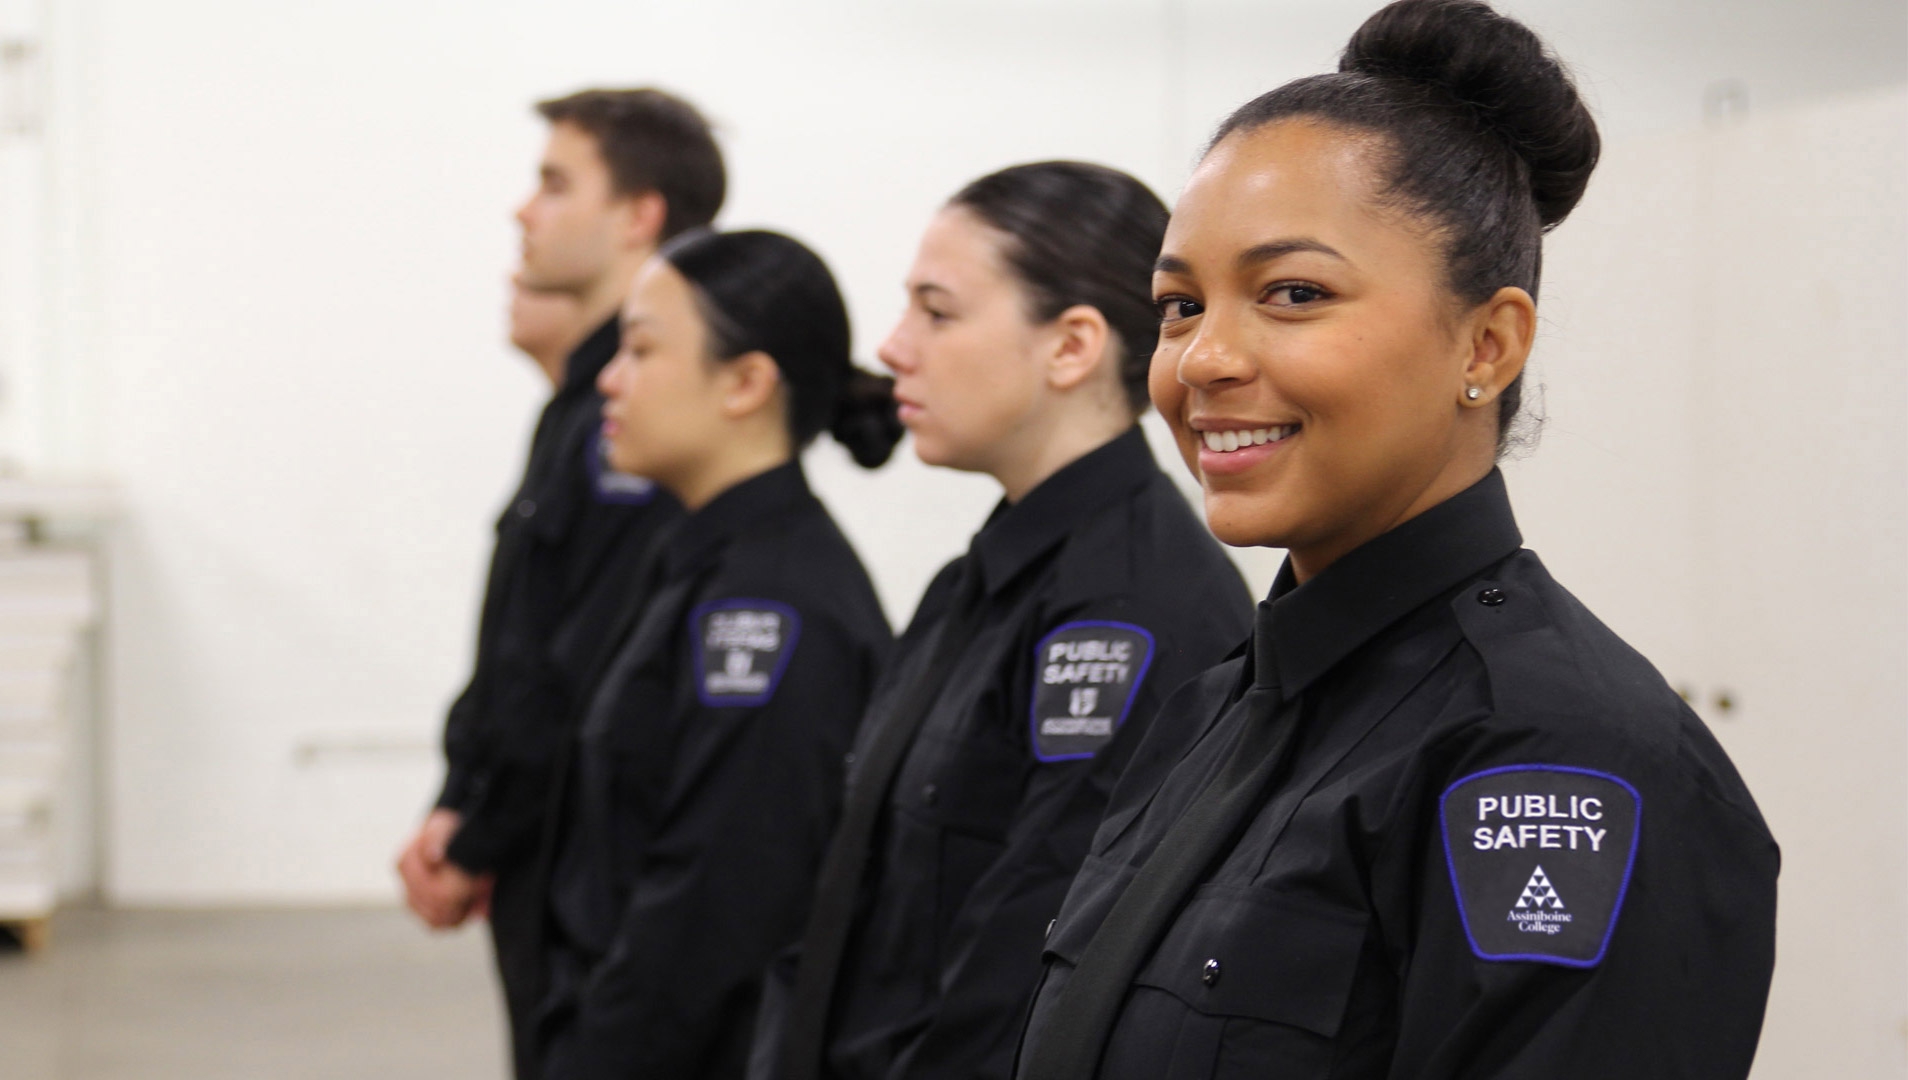 A lineup of Public Safety students in black uniforms, with the closest one smiling at the camera.